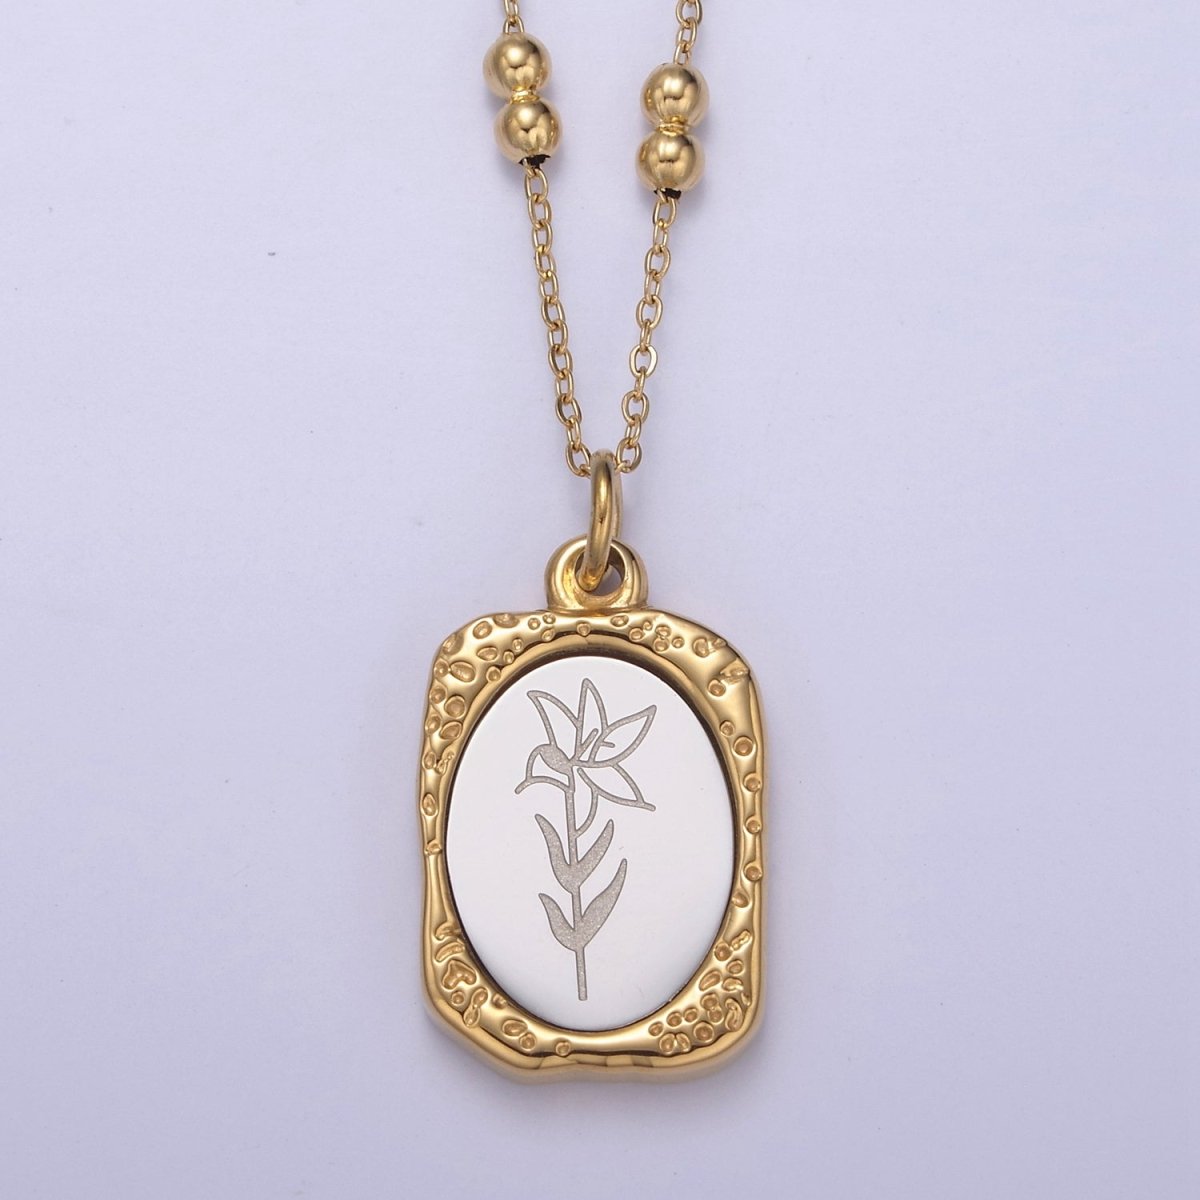 Gold Flower Tag Charm Engraved Floral Pendant Necklace with Satellite Chain Necklace Wholesale Fashion Jewelry | WA-708 to WA-720 Clearance Pricing - DLUXCA